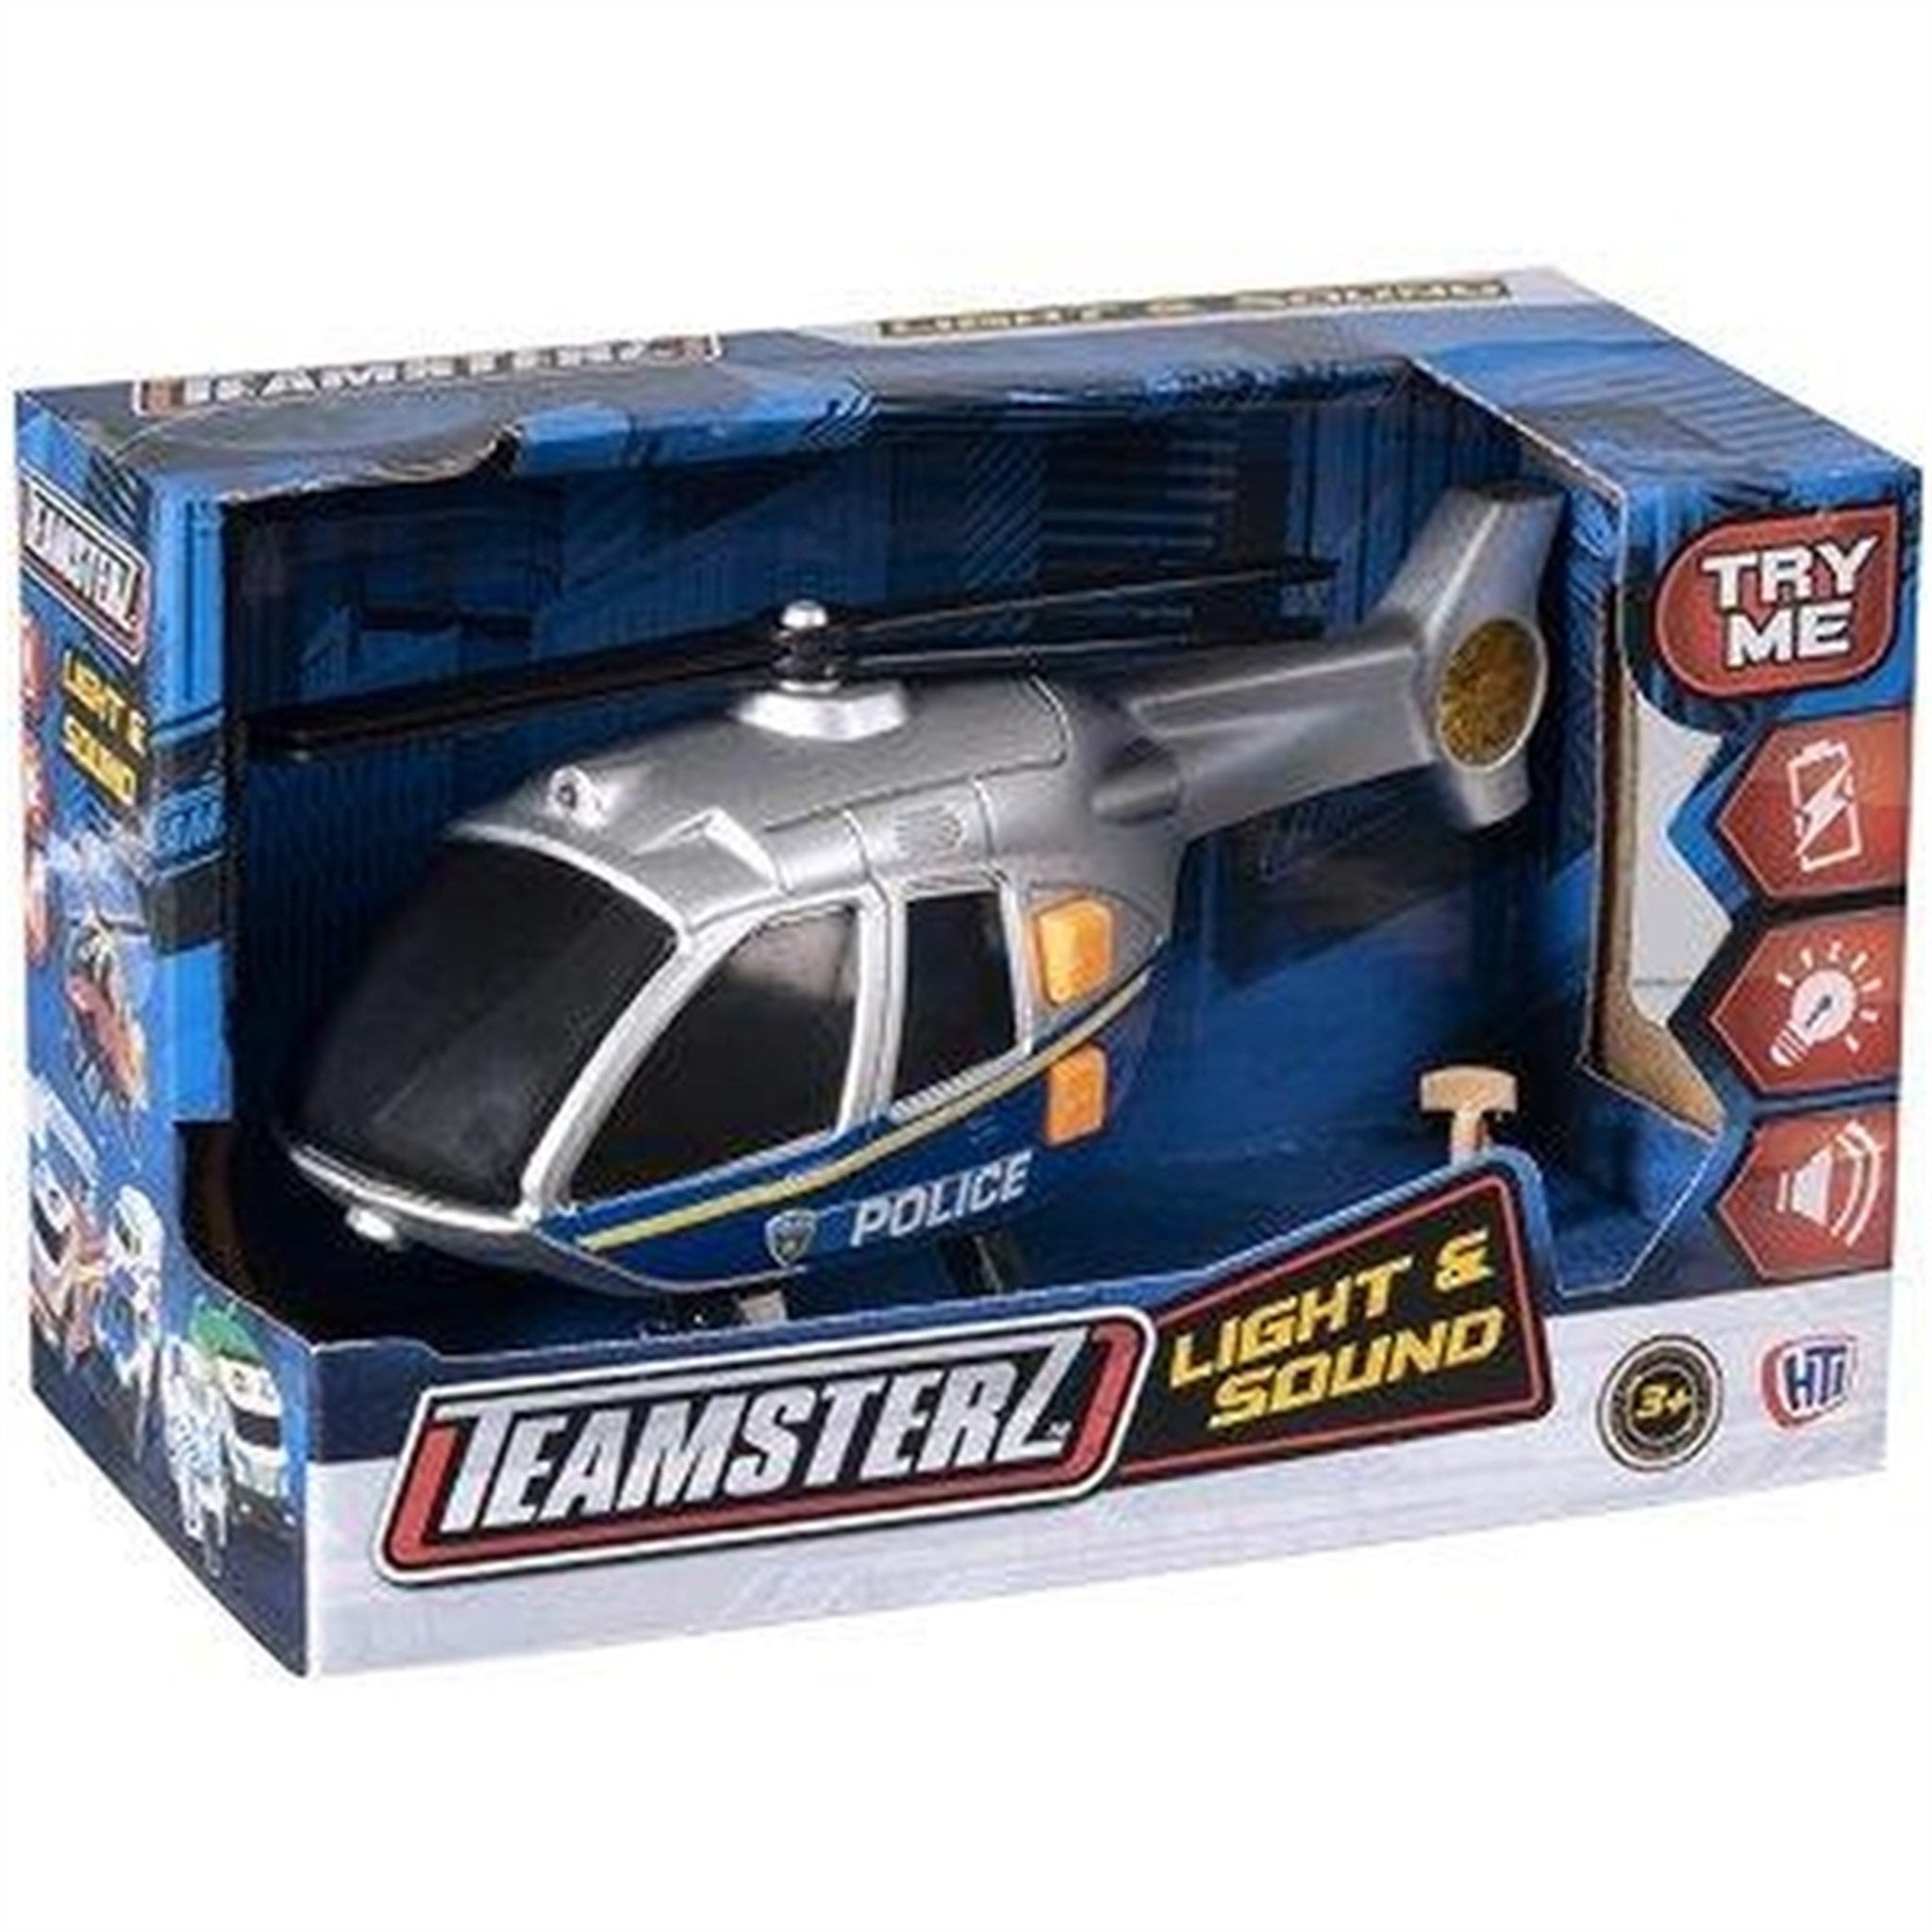 Teamsterz Small L&S Helikopter 2